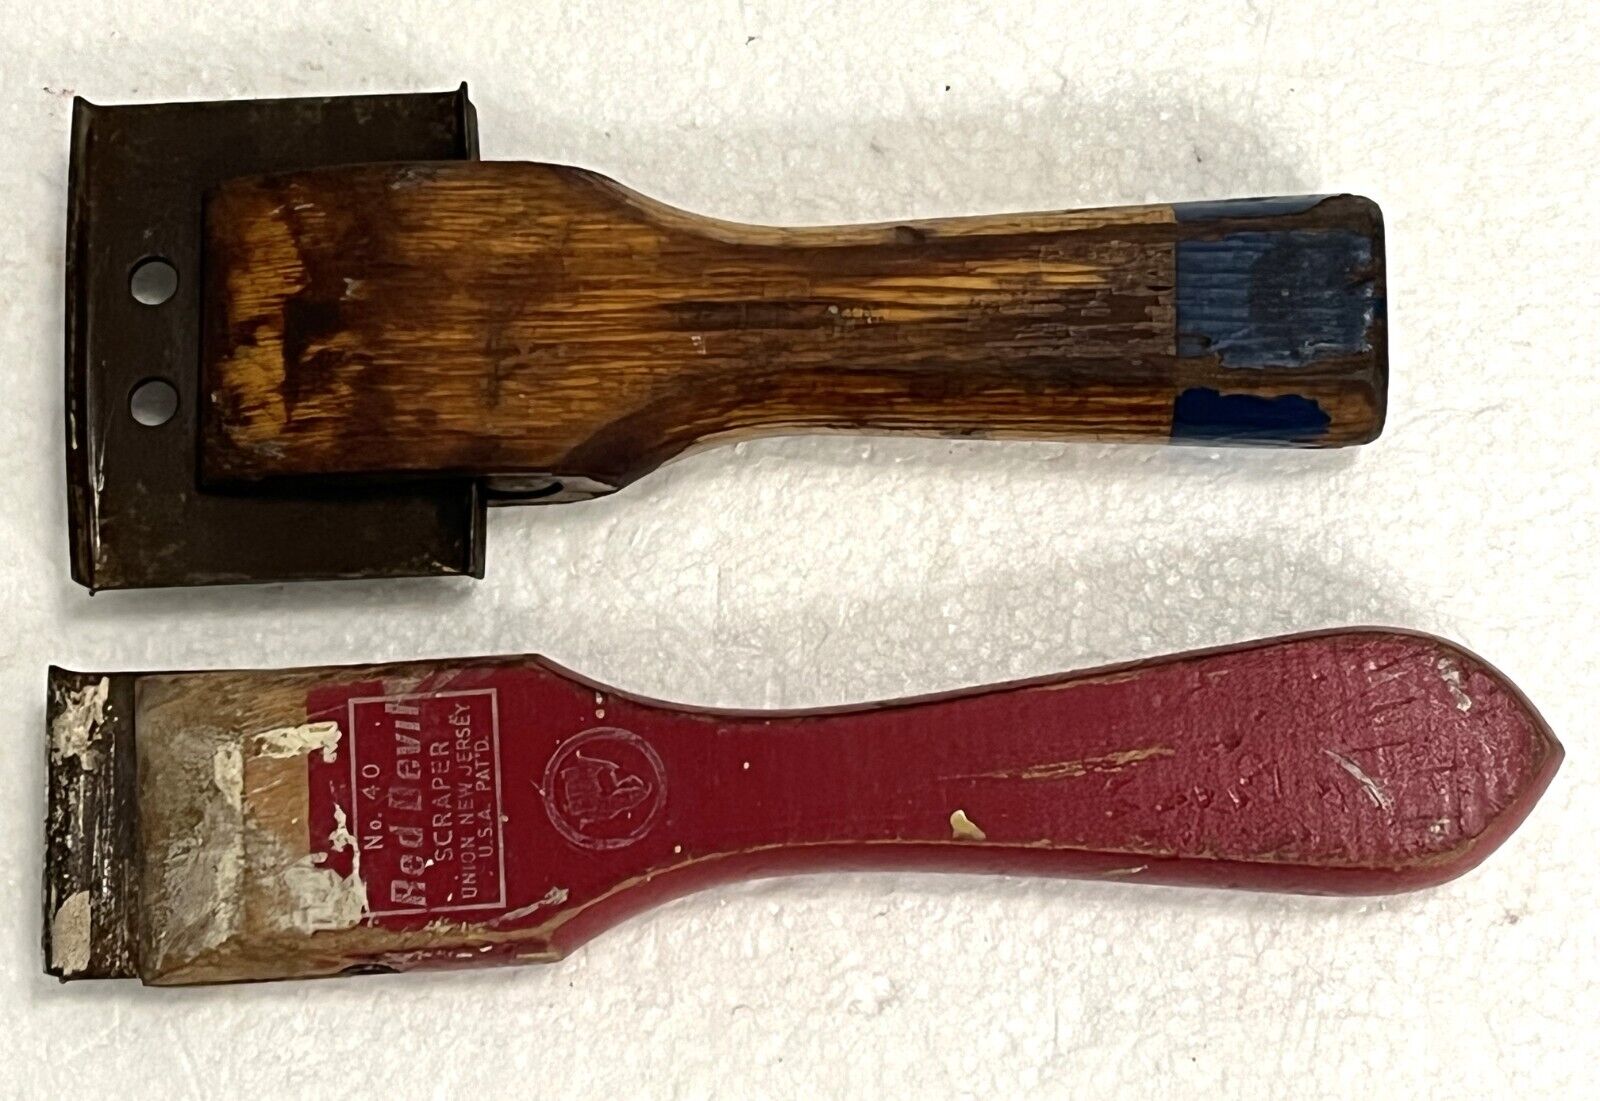 2 Vintage Wooden Handle Scrapers: Red Devil No. 40  Made In U.S.A. & One Unbrand